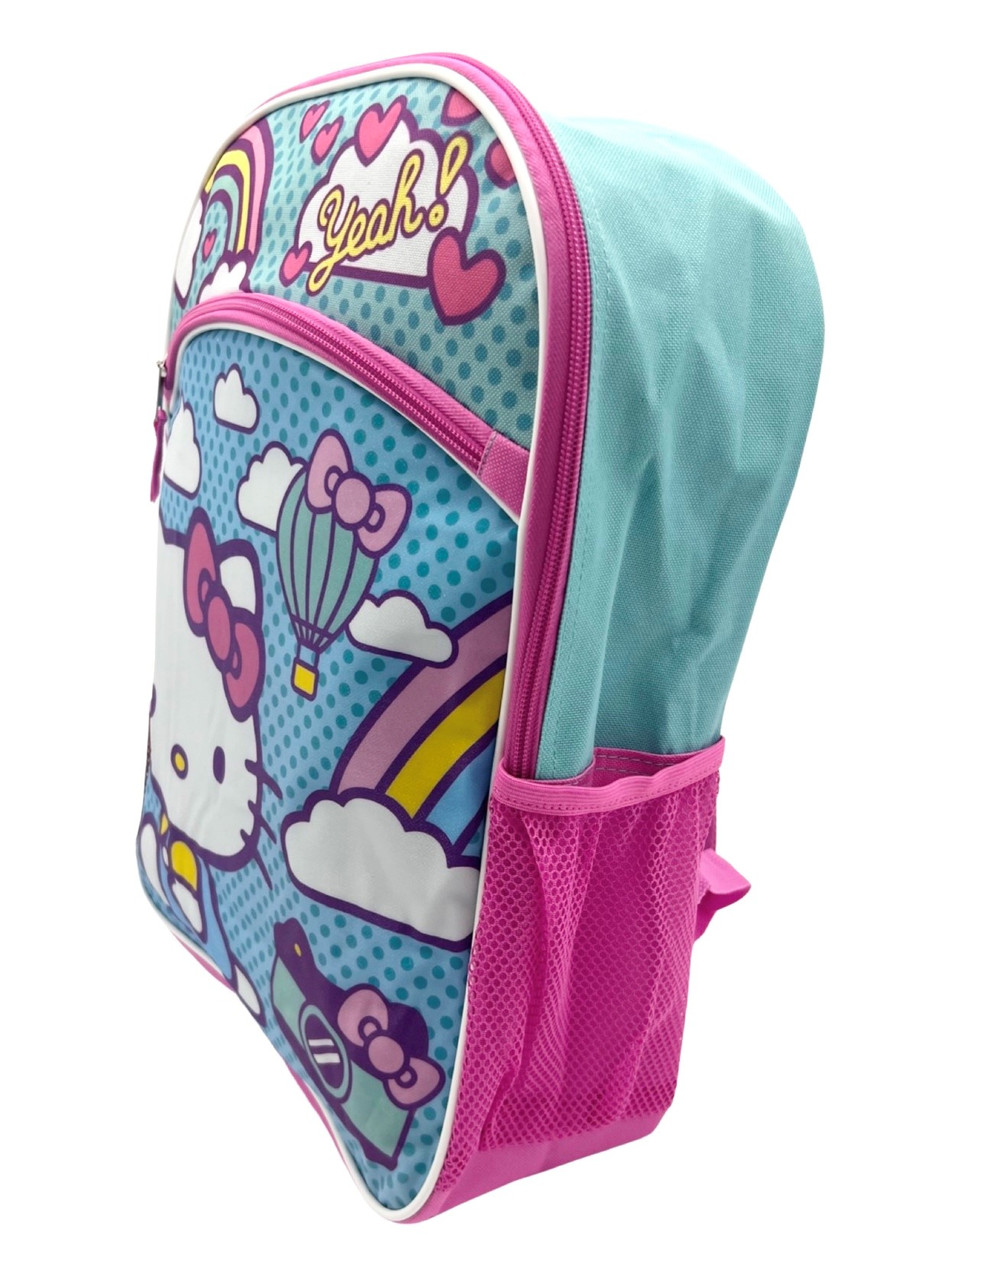 https://cdn11.bigcommerce.com/s-31ycg3ui3f/images/stencil/1280x1280/products/2007/6302/16in_Backpack_with_Pockets_-_Hello_Kitty_5__76253.1692923434.jpg?c=1?imbypass=on